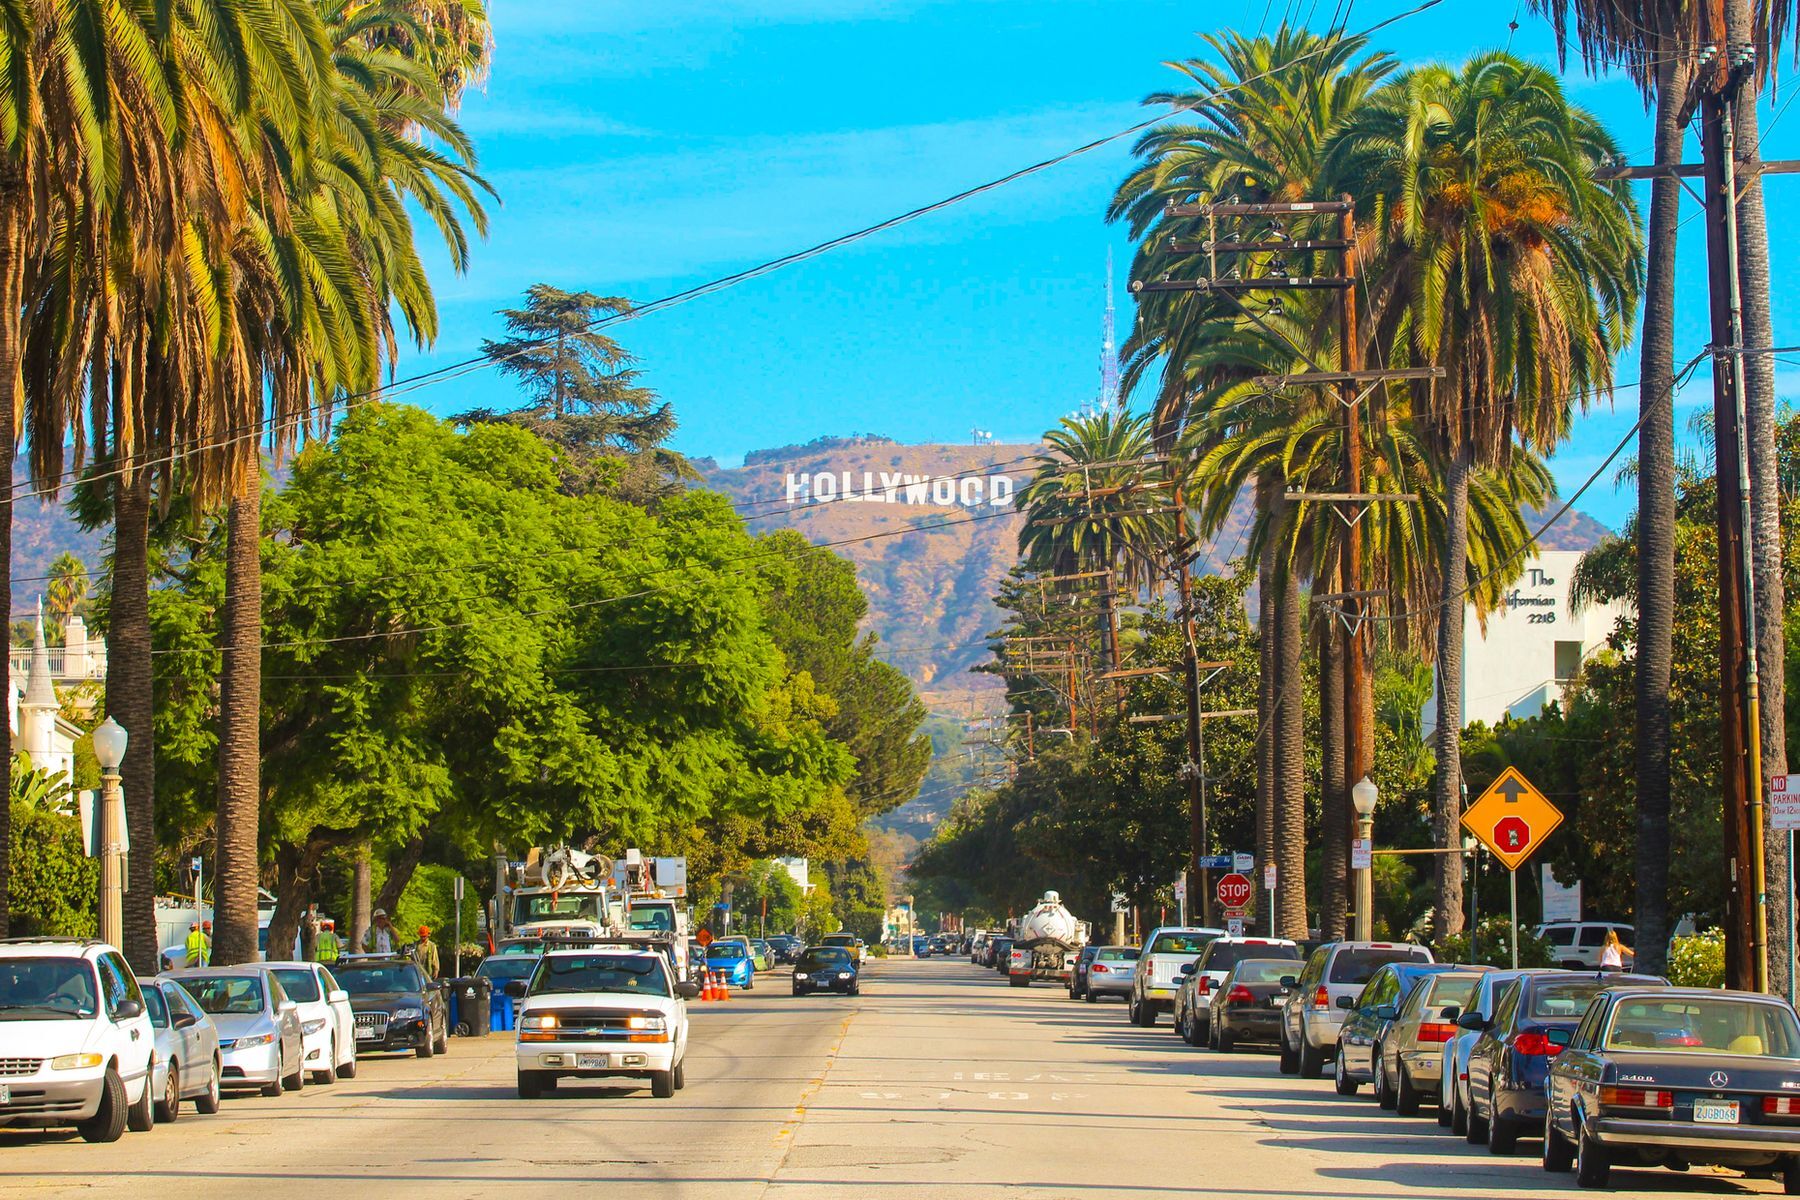 <p>Glitz, glamour, and the rich and famous—that sums up many people’s expectations of Hollywood. The reality is that <a href="https://www.worldnomads.com/travel-safety/north-america/united-states/is-los-angeles-safe">Hollywood</a> is a relatively small neighbourhood in Los Angeles, and while there’s plenty to see—including the Hollywood Walk of Fame, the Dolby Theatre, and the famous sign—it’s a very crowded and sometimes sketchy place. Skip this part of Tinseltown and head to the Getty Museum or Griffith Observatory in <a href="https://travellersworldwide.com/is-los-angeles-safe/">downtown L.A.</a> and then hit up some amazing Mexican food as well. </p>